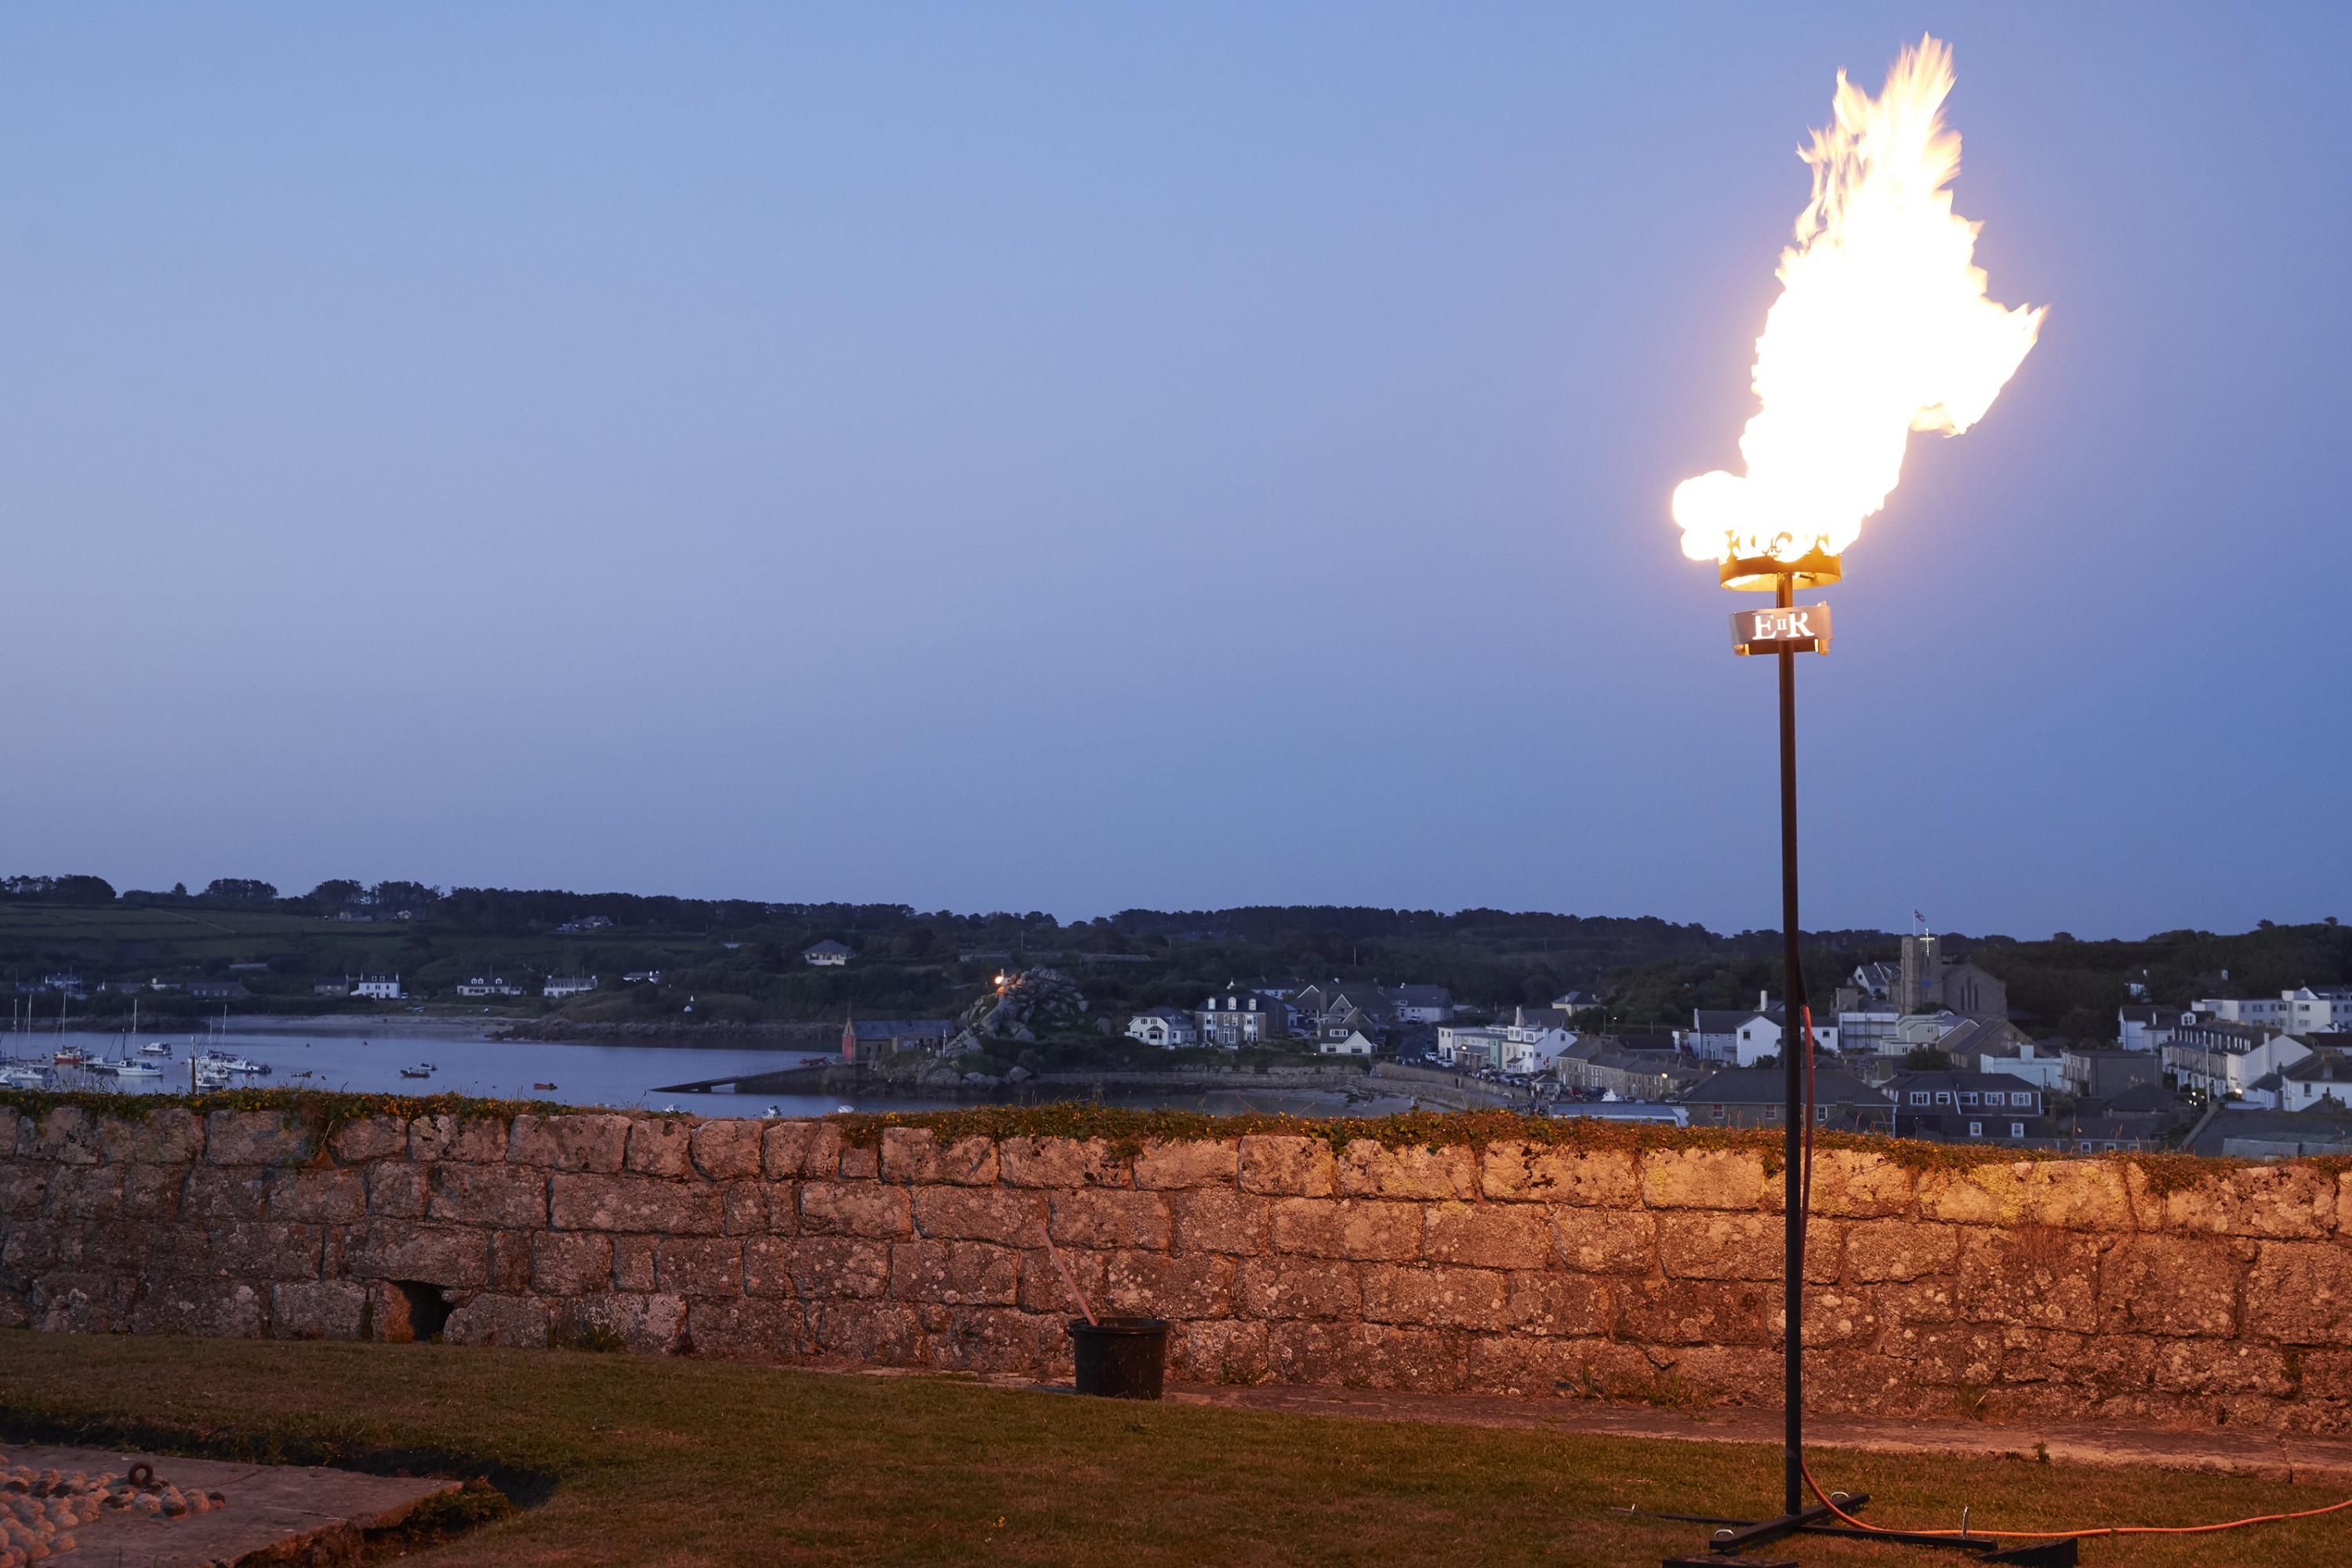 Image of the Queen's Jubilee beacons at Hugh House and the lifeboat slip